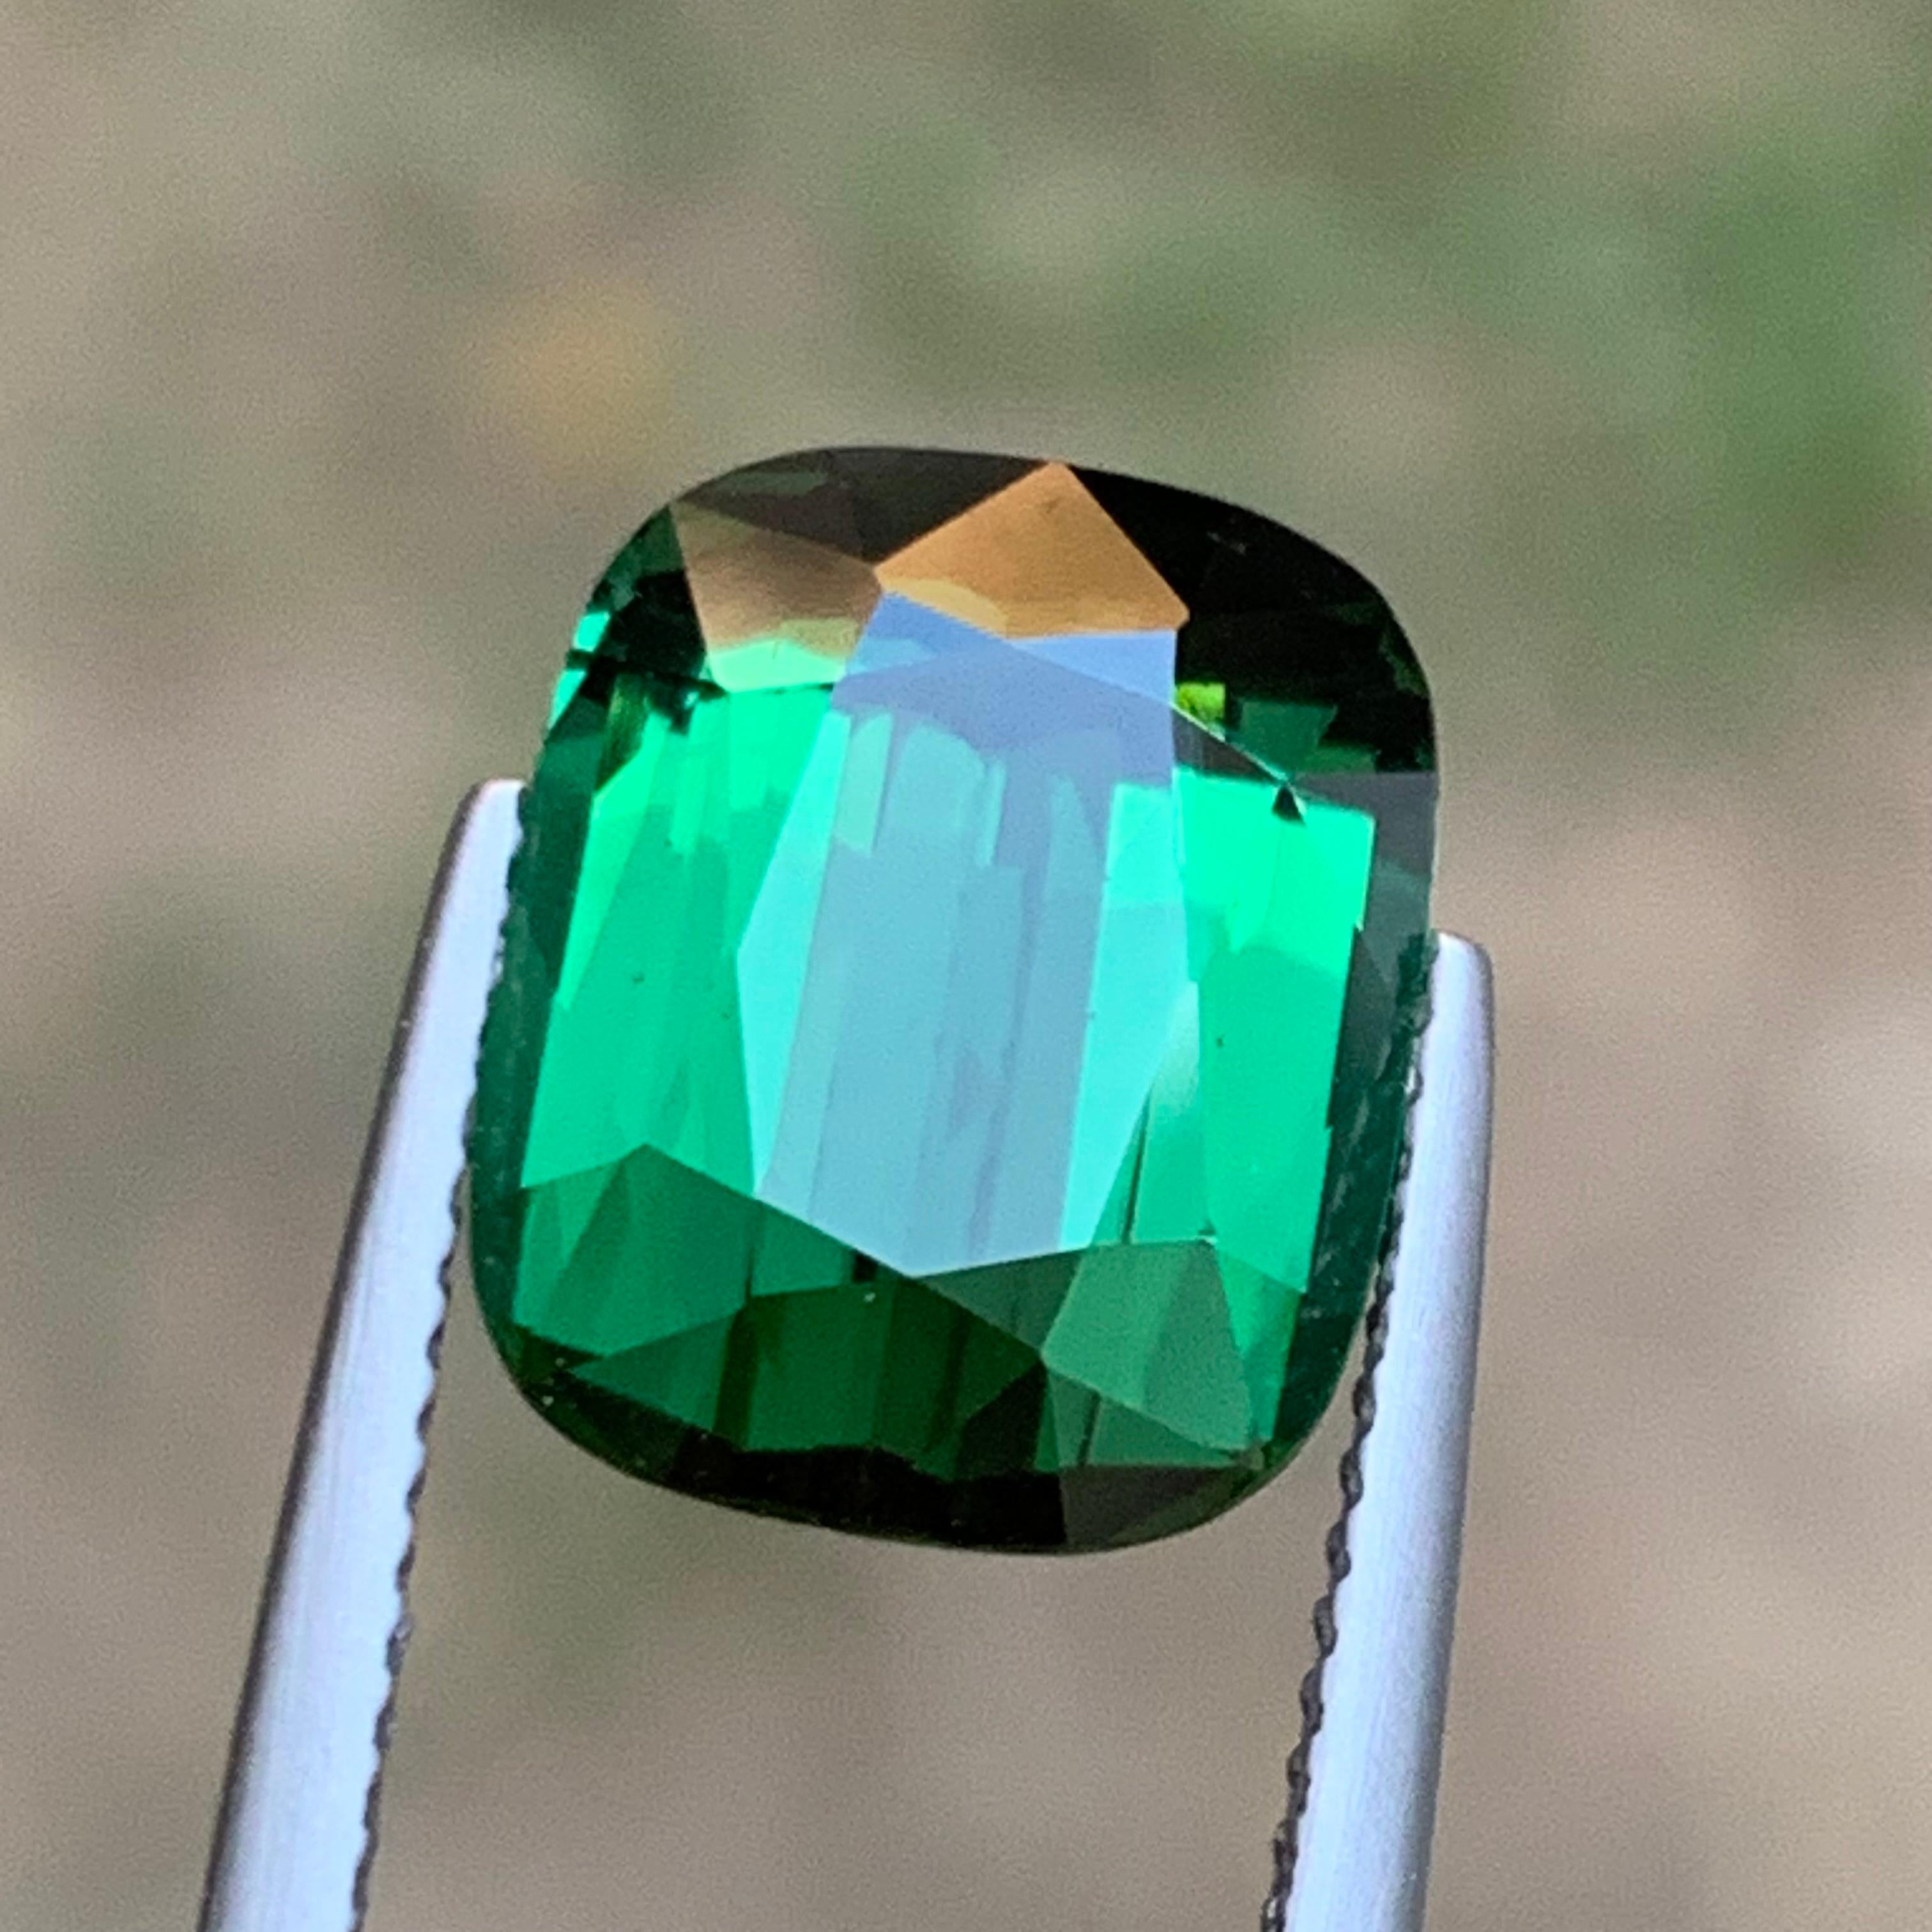 Rare Green Natural Tourmaline Gemstone, 7.65 Ct Cushion Cut for a Ring/Pendant For Sale 8